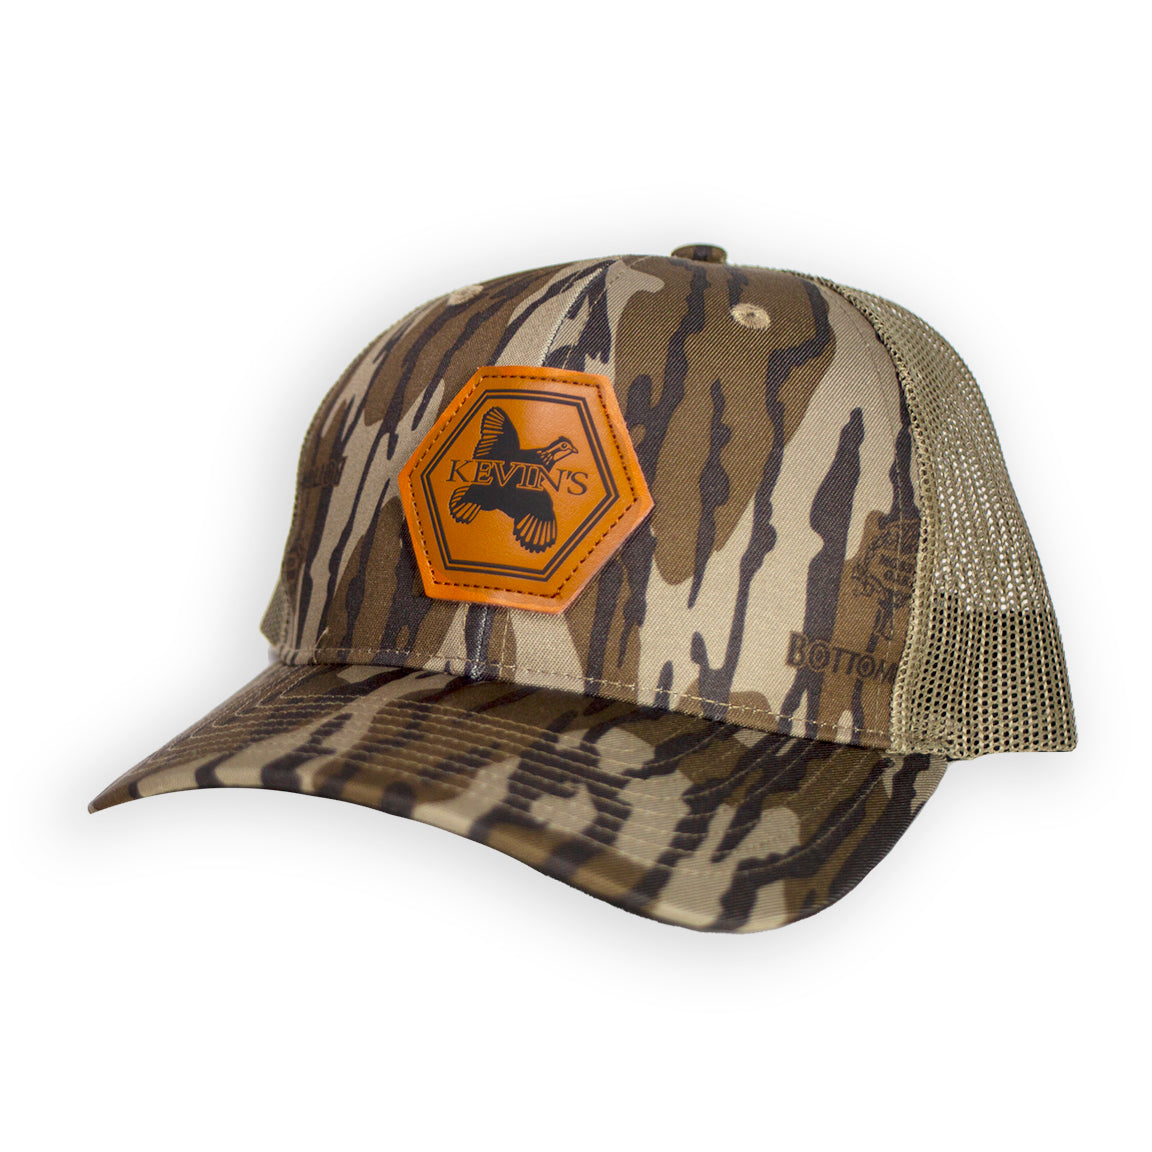 Kevin's Richardson Leather Quail Patch Cap-Men's Accessories-Bottomland-ONE SIZE-Kevin's Fine Outdoor Gear & Apparel